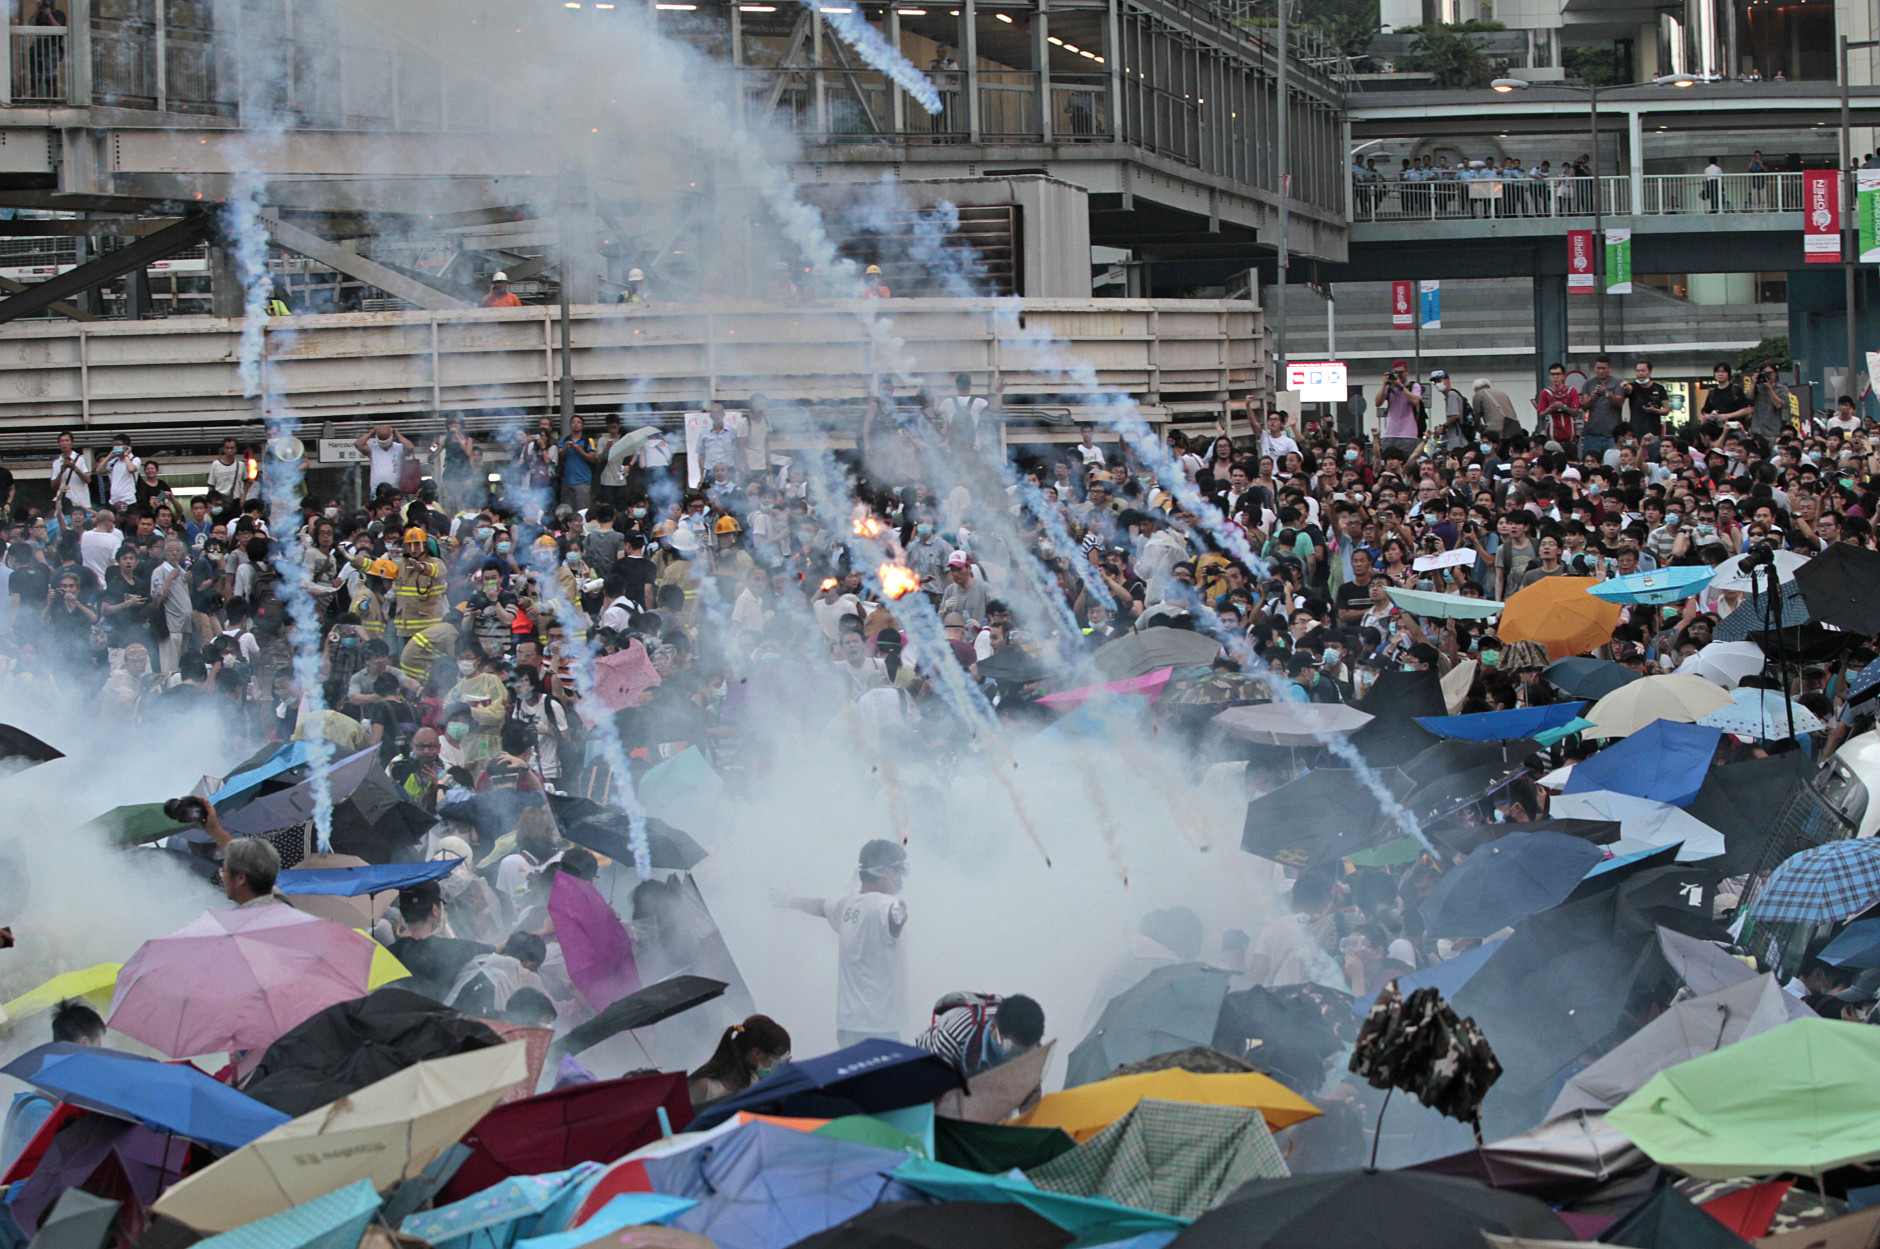 FOR USE AS DESIRED, YEAR END PHOTOS - FILE - Riot police launch tear gas into the crowd as thousands of protesters surround the government headquarters in Hong Kong Sunday, Sept. 28, 2014. Hong Kong police used tear gas and warned of further measures as they tried to clear thousands of pro-democracy protesters gathered outside government headquarters in a challenge to Beijing over its decision to restrict democratic reforms for the city. (AP Photo/Wally Santana, File)